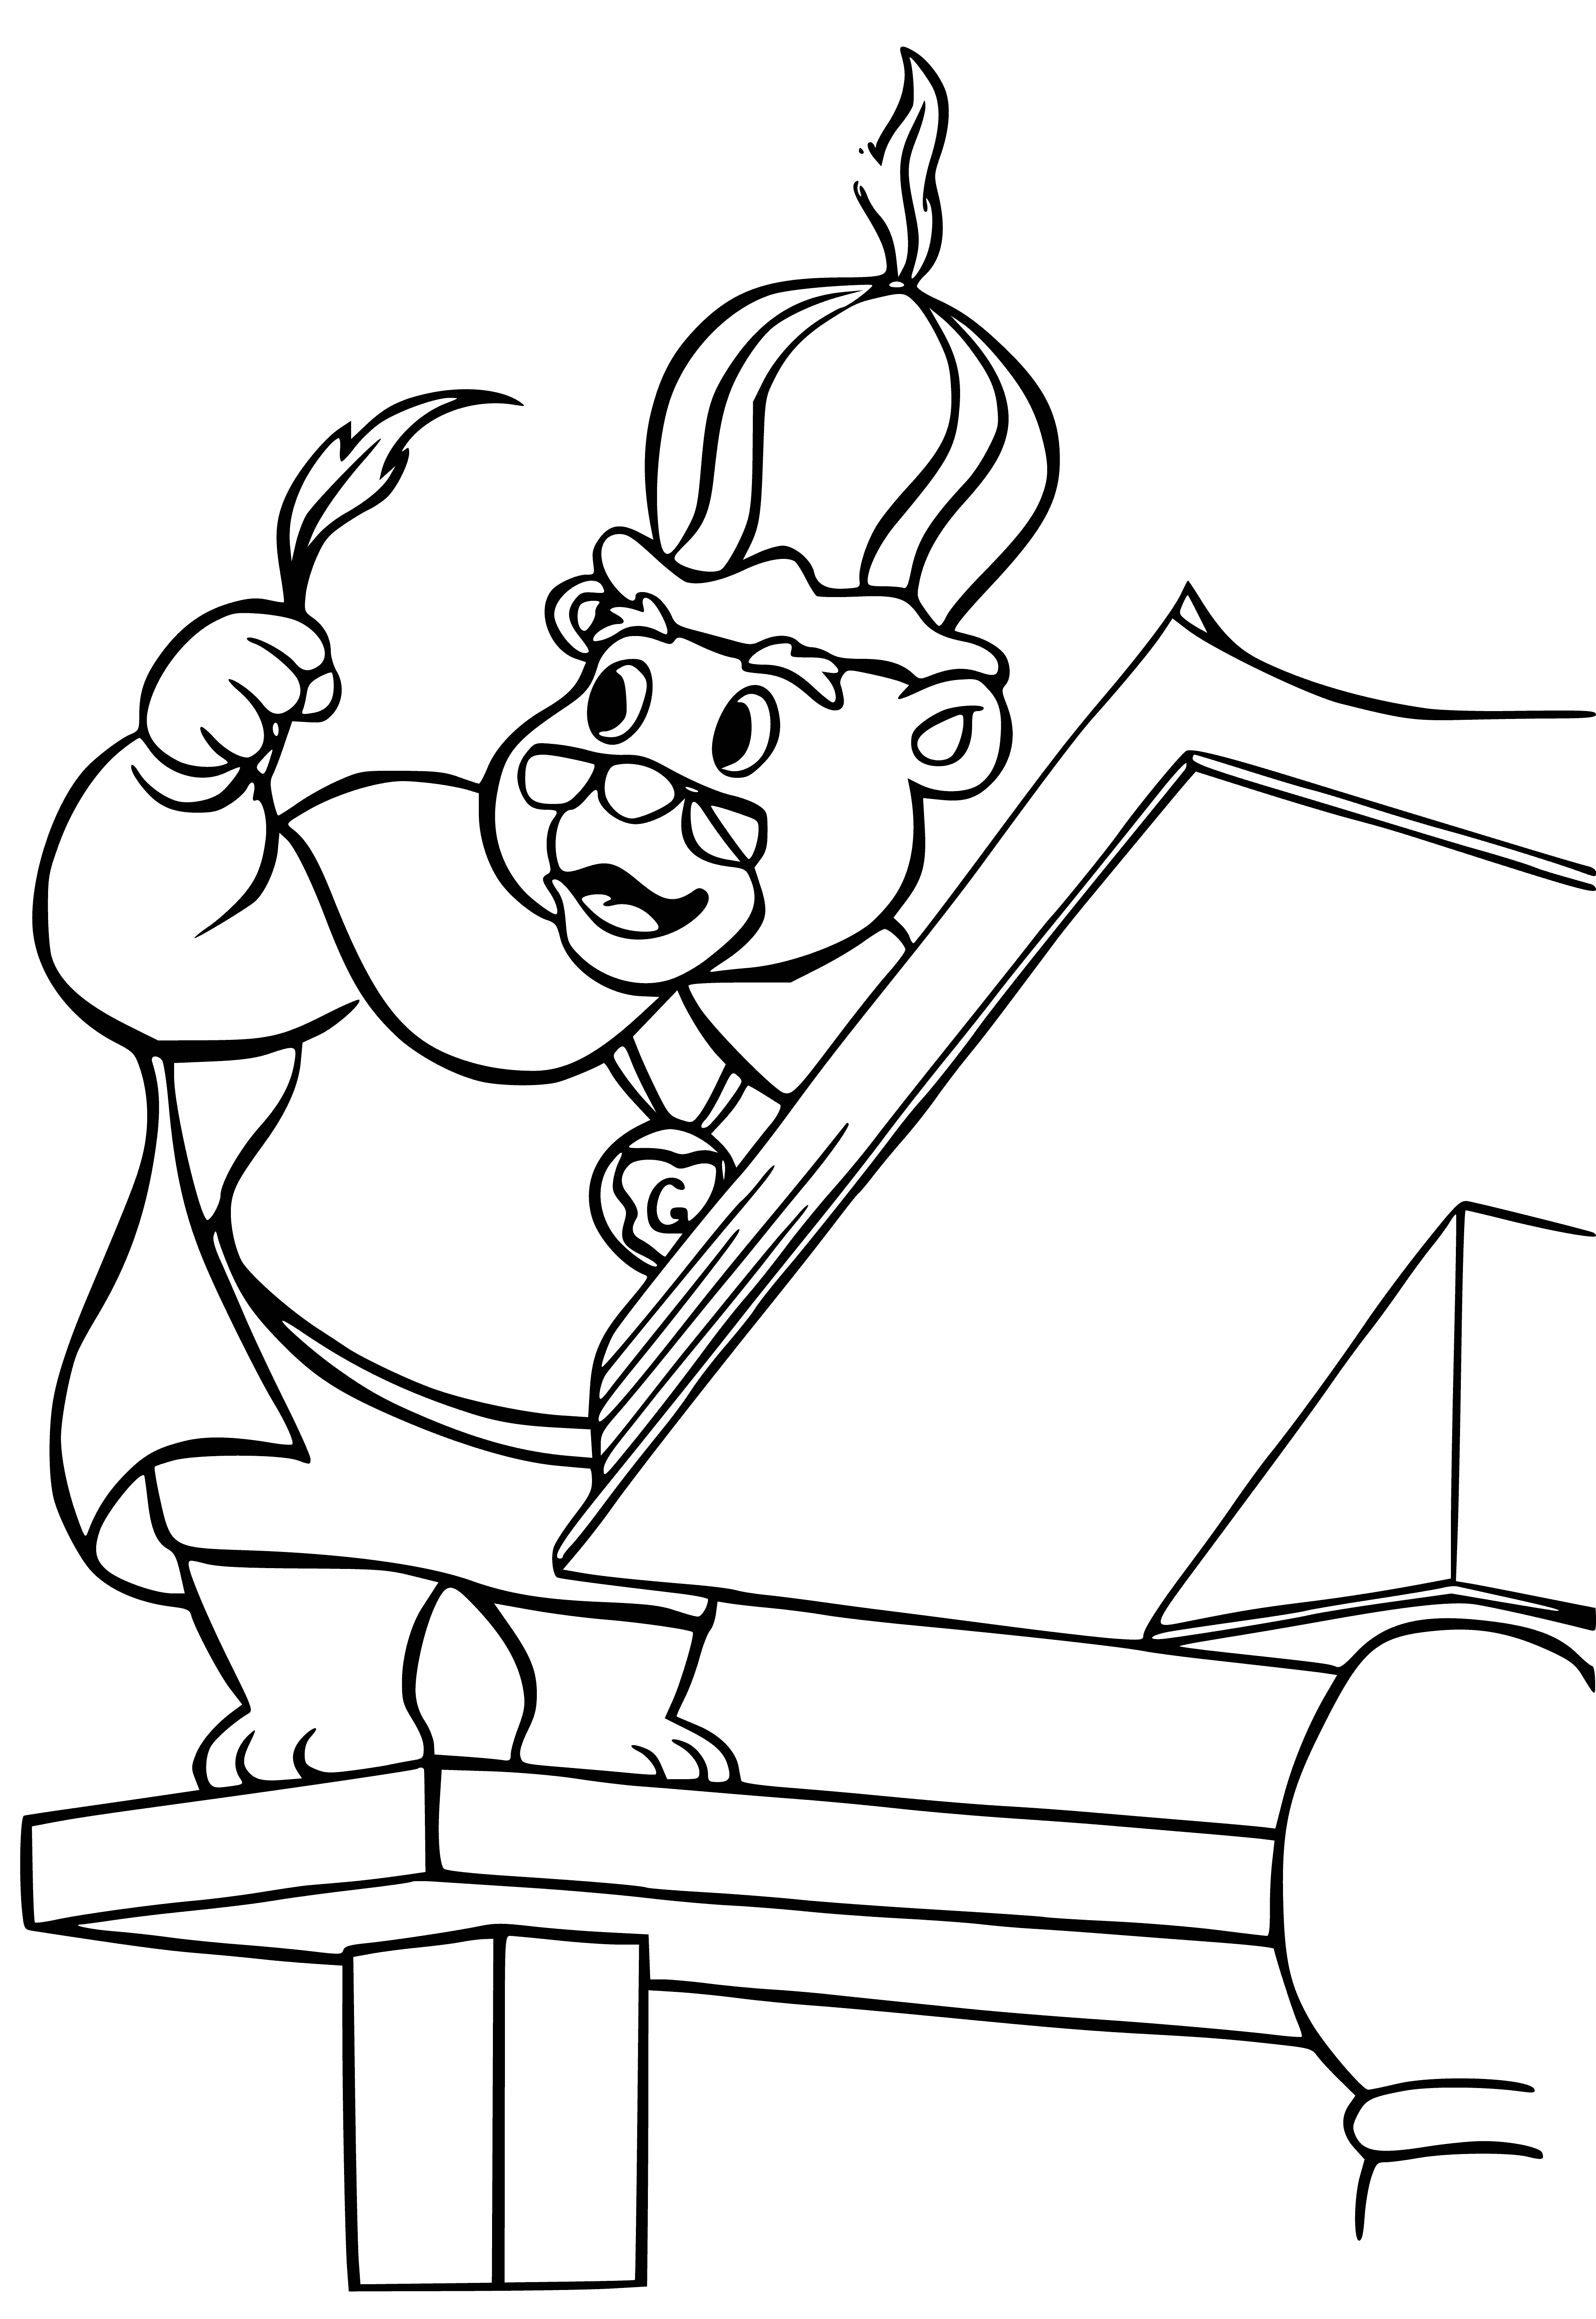 coloring page: Five gummy bears in a row of different colors (yellow, green, orange, red, and purple) are depicted on a white plate.